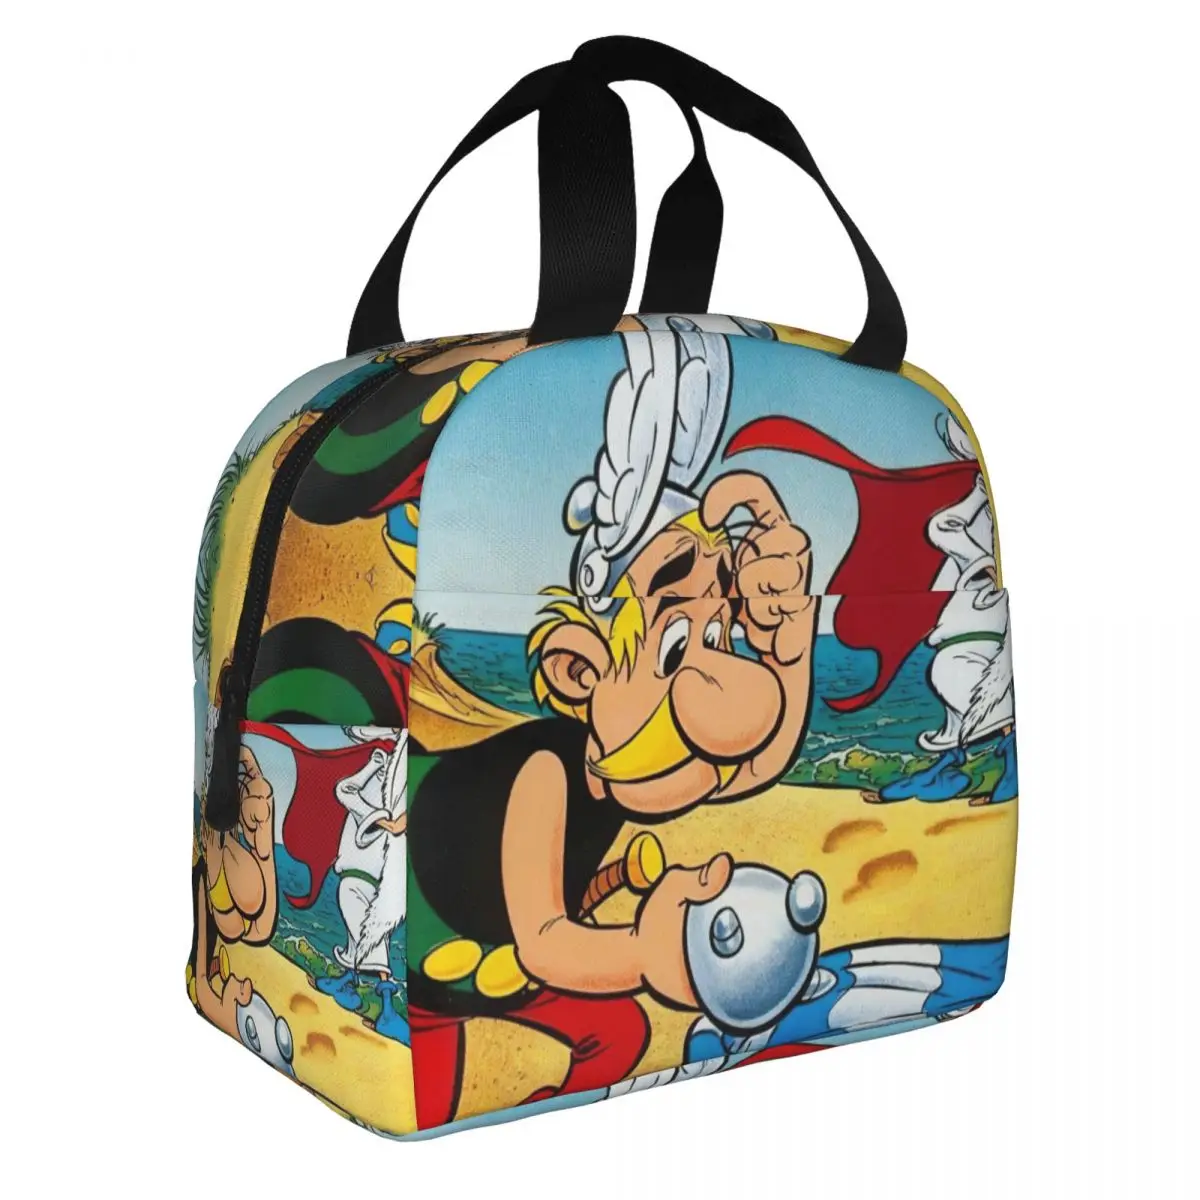 Asterix Obelix Lunch Bento Bags Portable Aluminum Foil thickened Thermal Insulation Oxford Cloth Lunch Bag for Women Men Boy